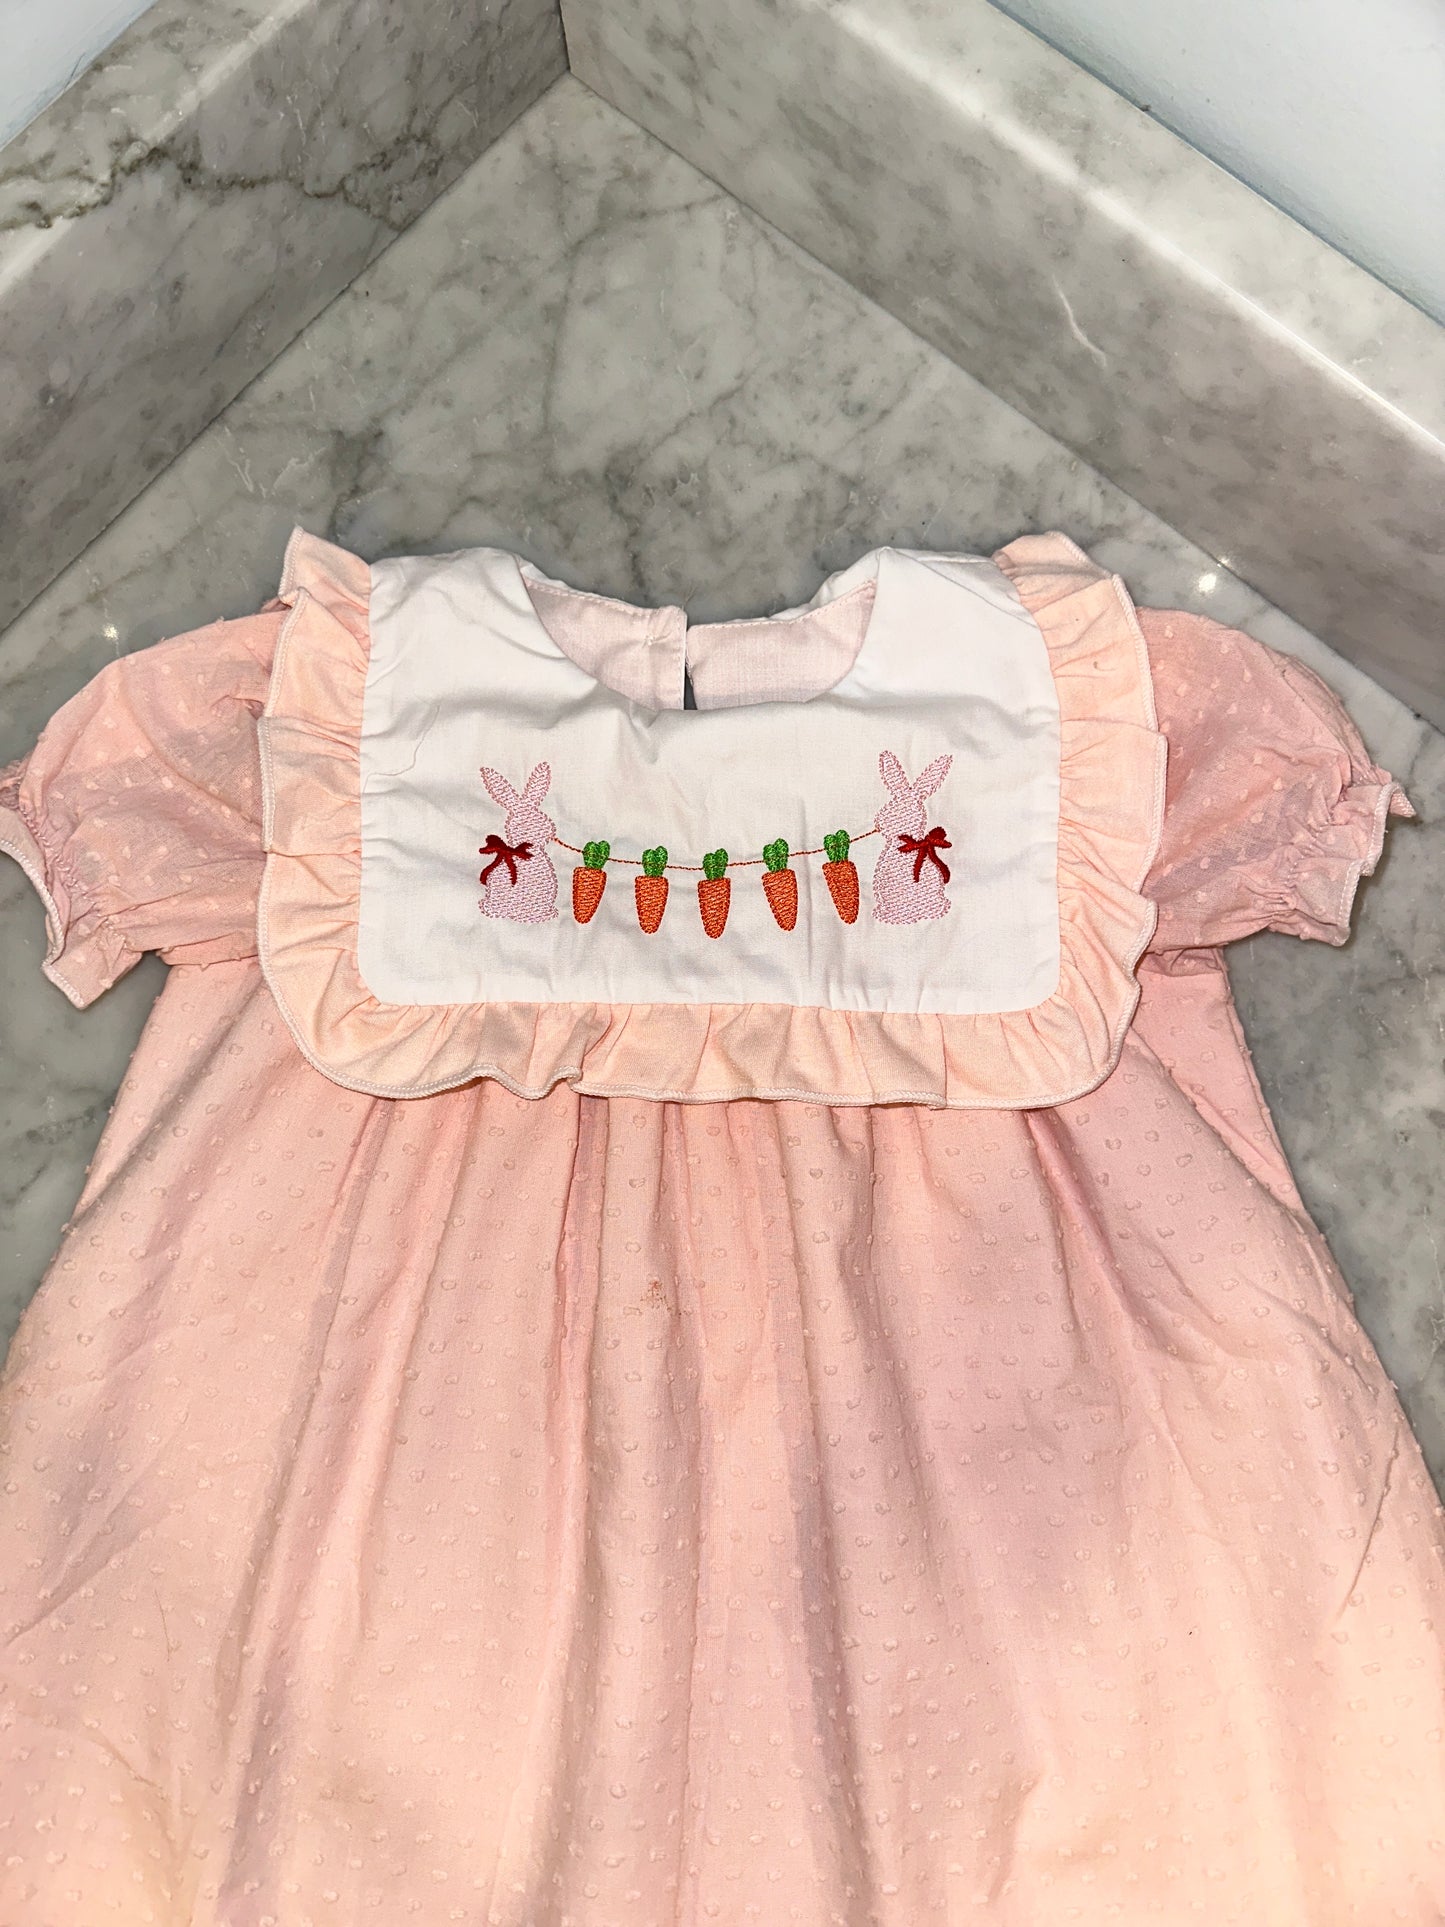 Adorable Girls Light Pink Swiss Dot Smocked Easter Dress with Bunnies and Carrots - Perfect Spring Outfit